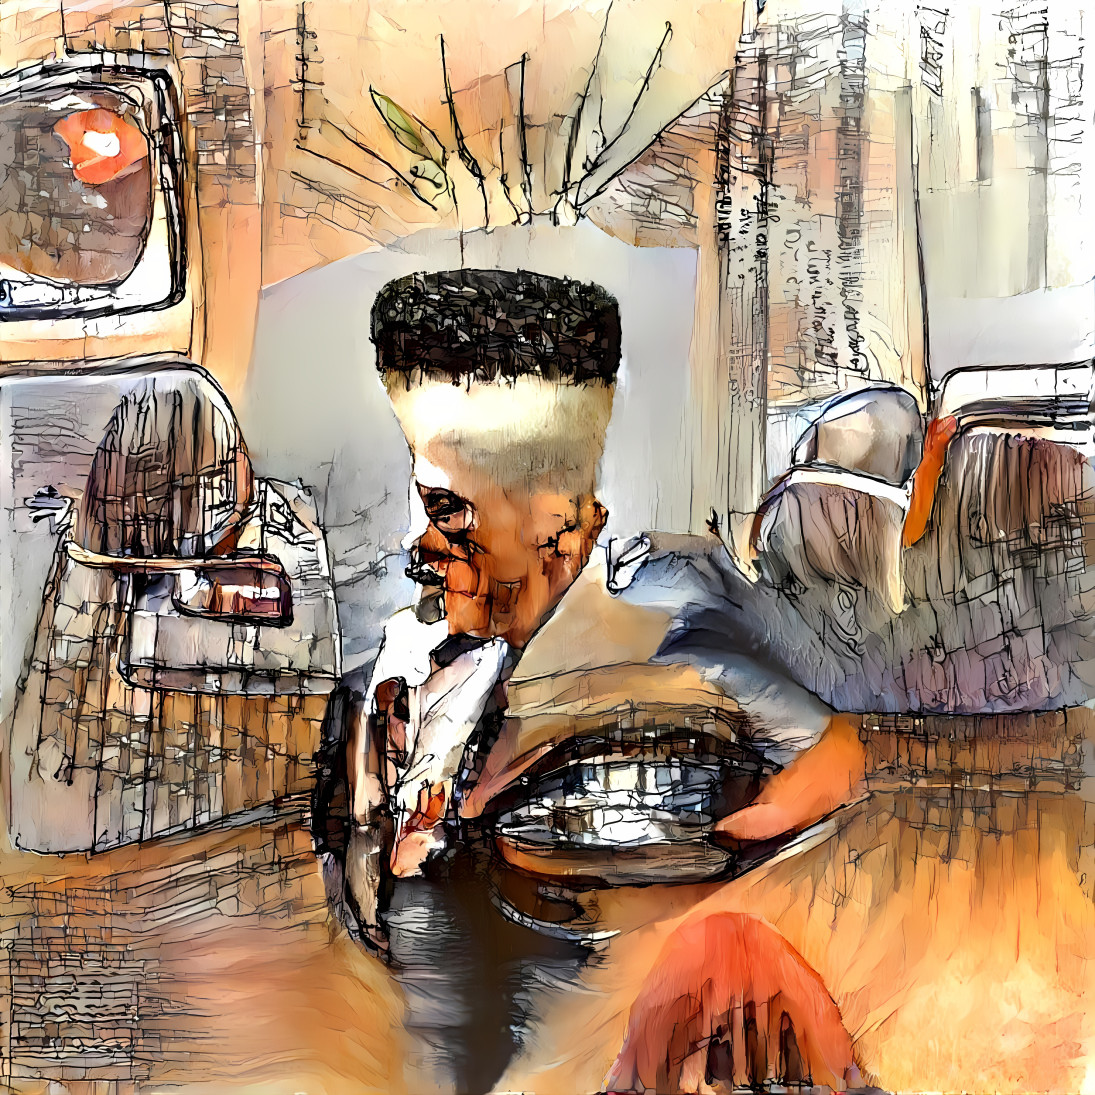 Here come old flat-top, he come groovin' up slowly